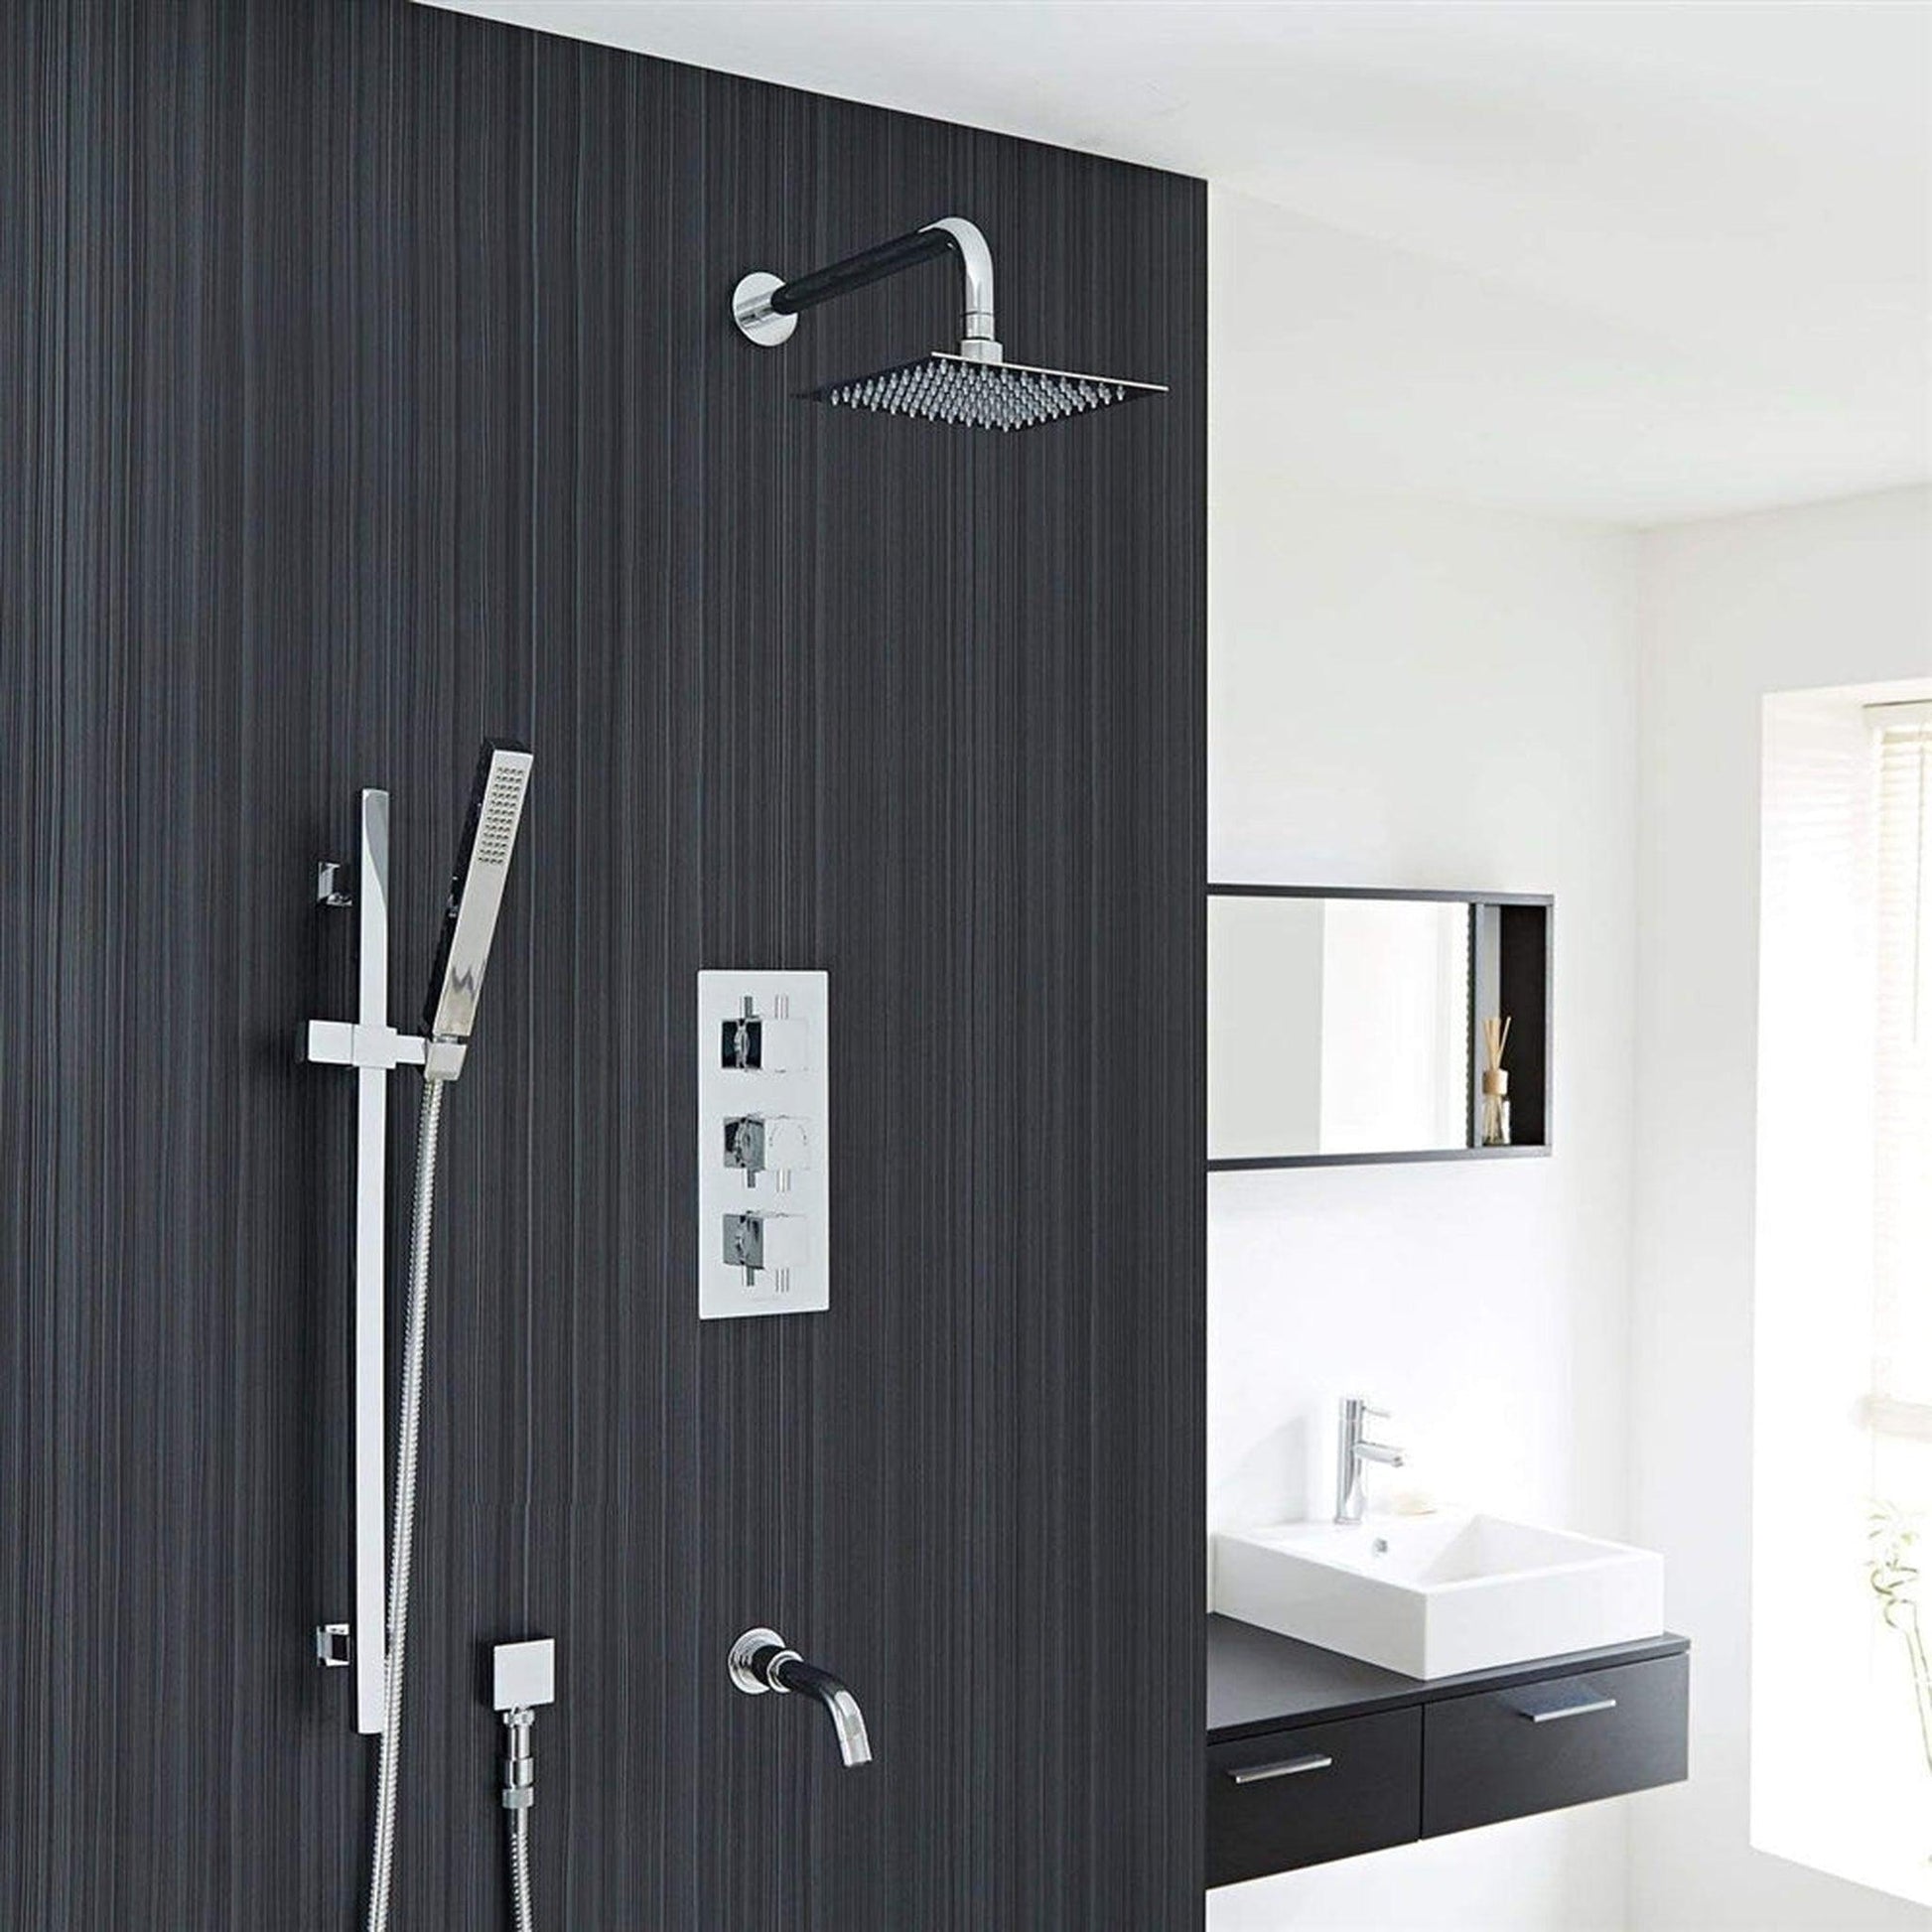 Fontana Liverpool Chrome 12" Wall-Mounted Thermostatic Rainfall Shower System With Hand Shower and Without Water Power LED Lights